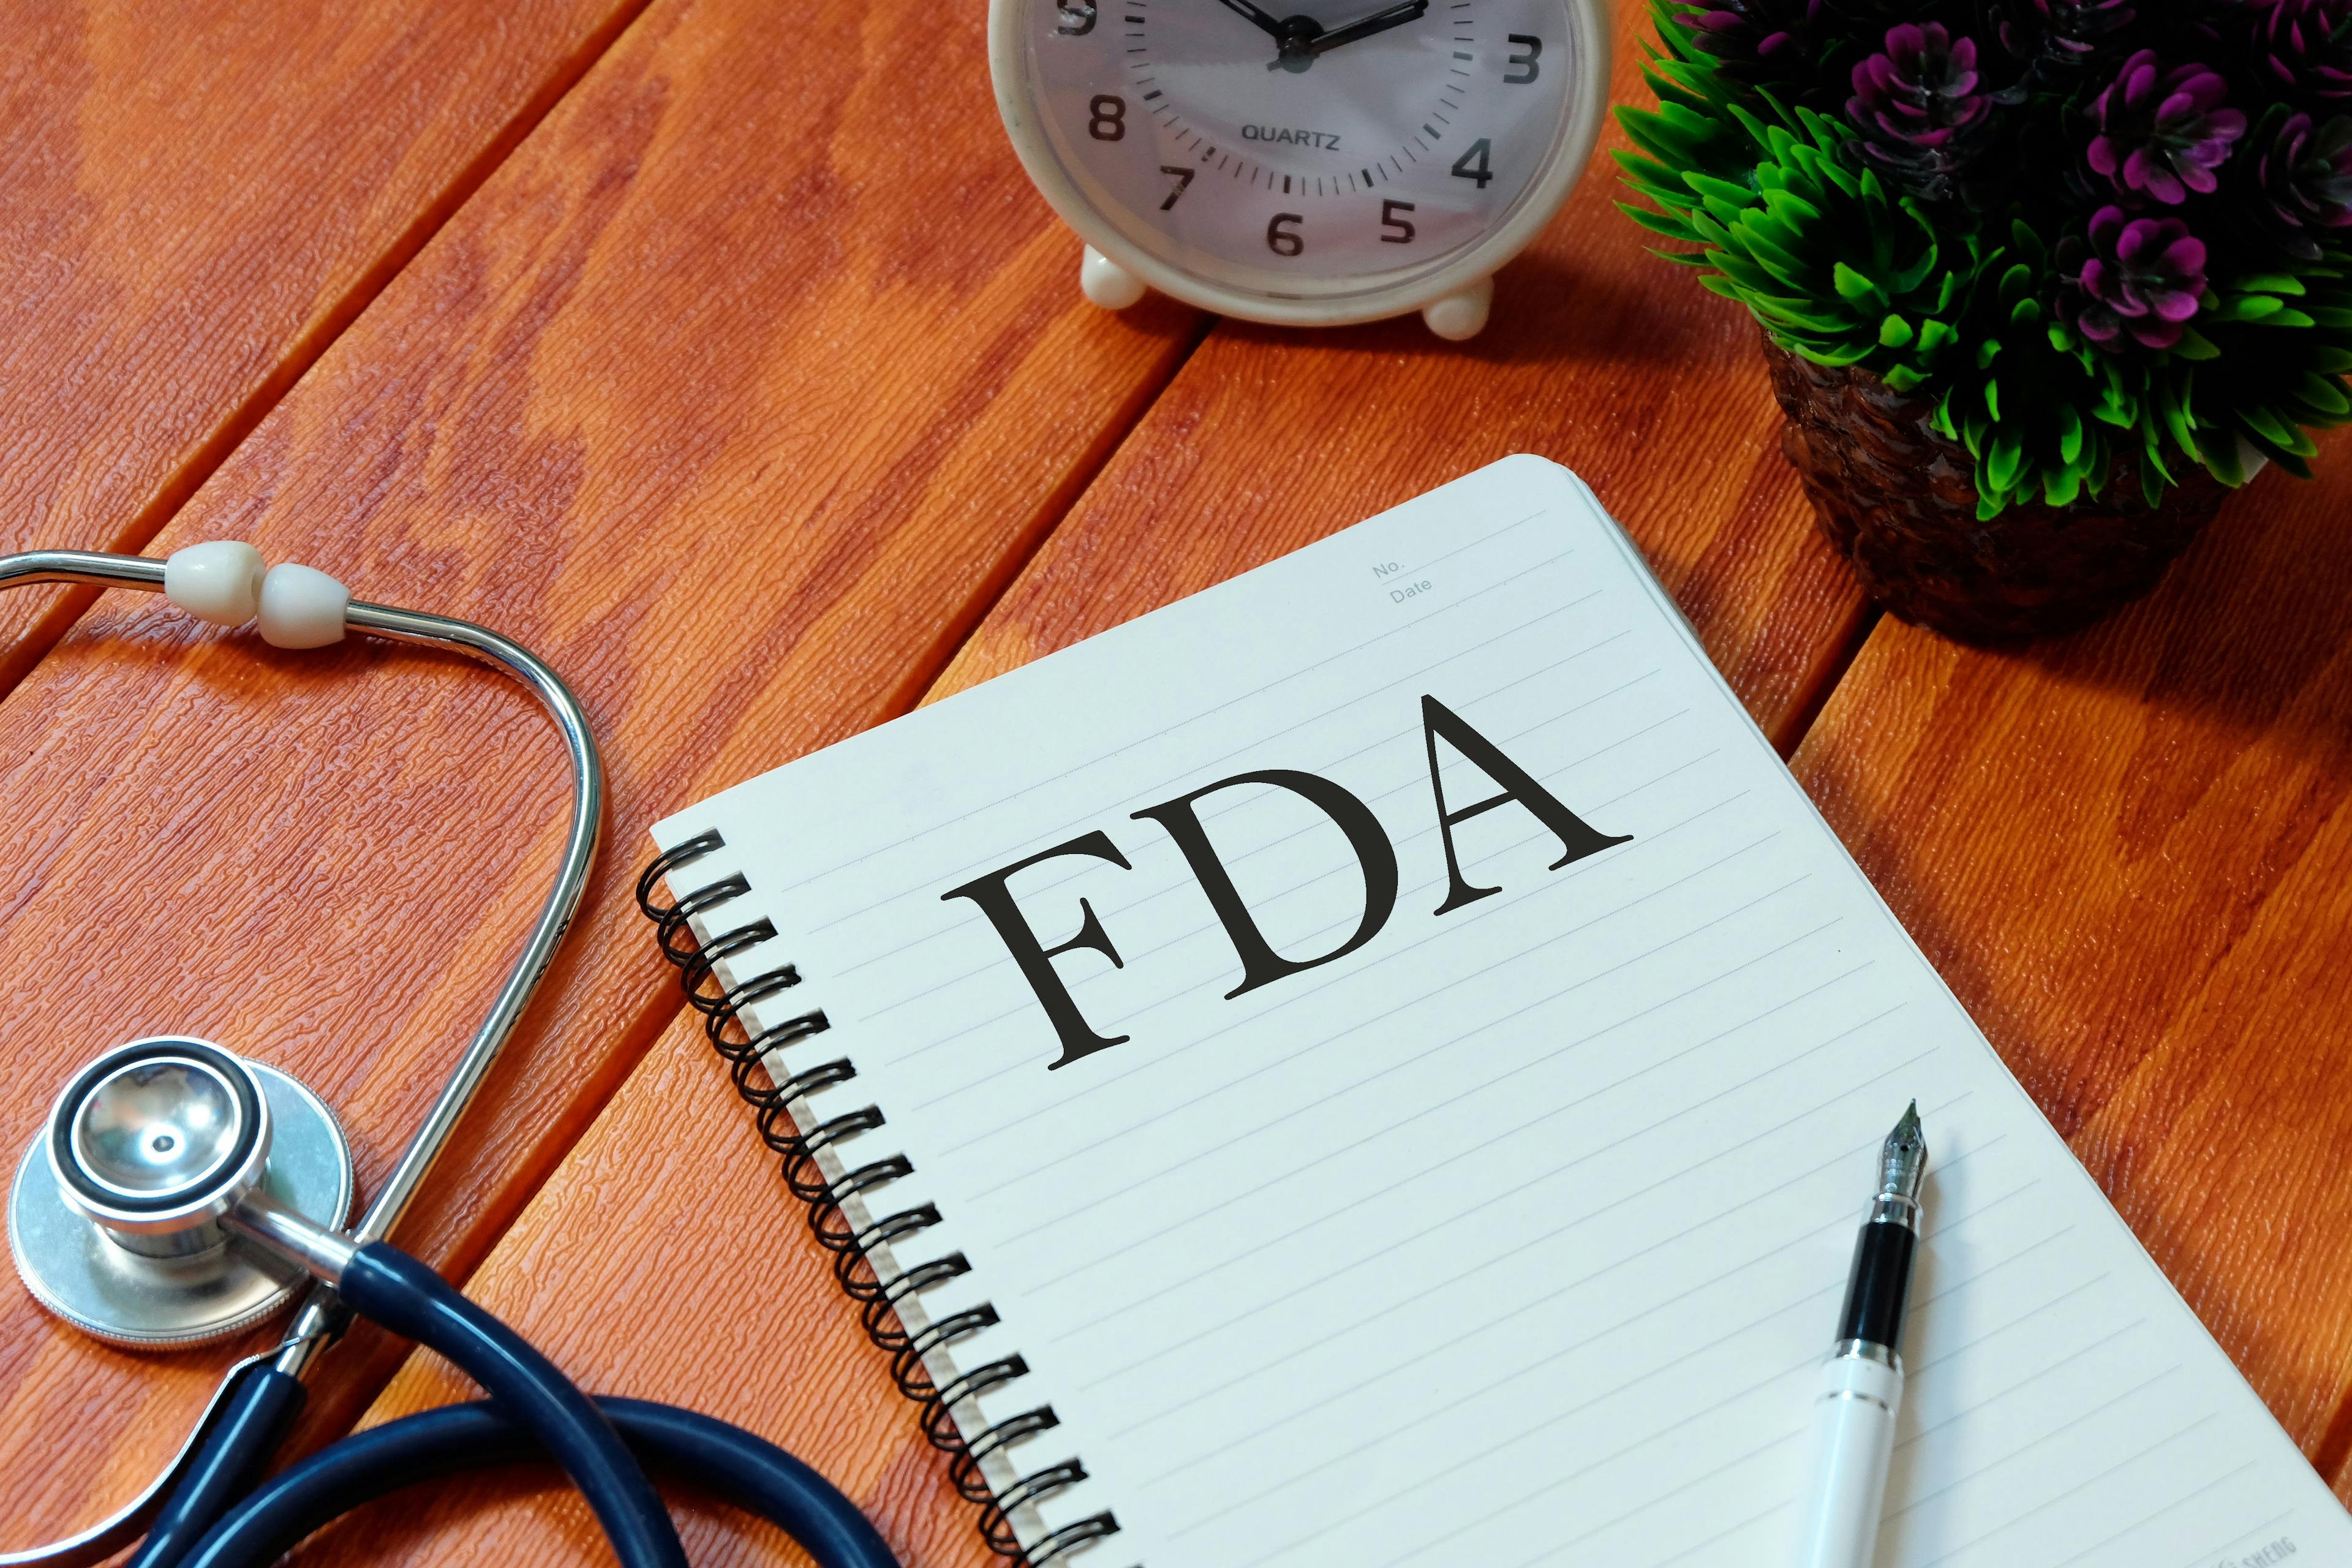 NDA For Extended-Release Jakafi Rejected by FDA